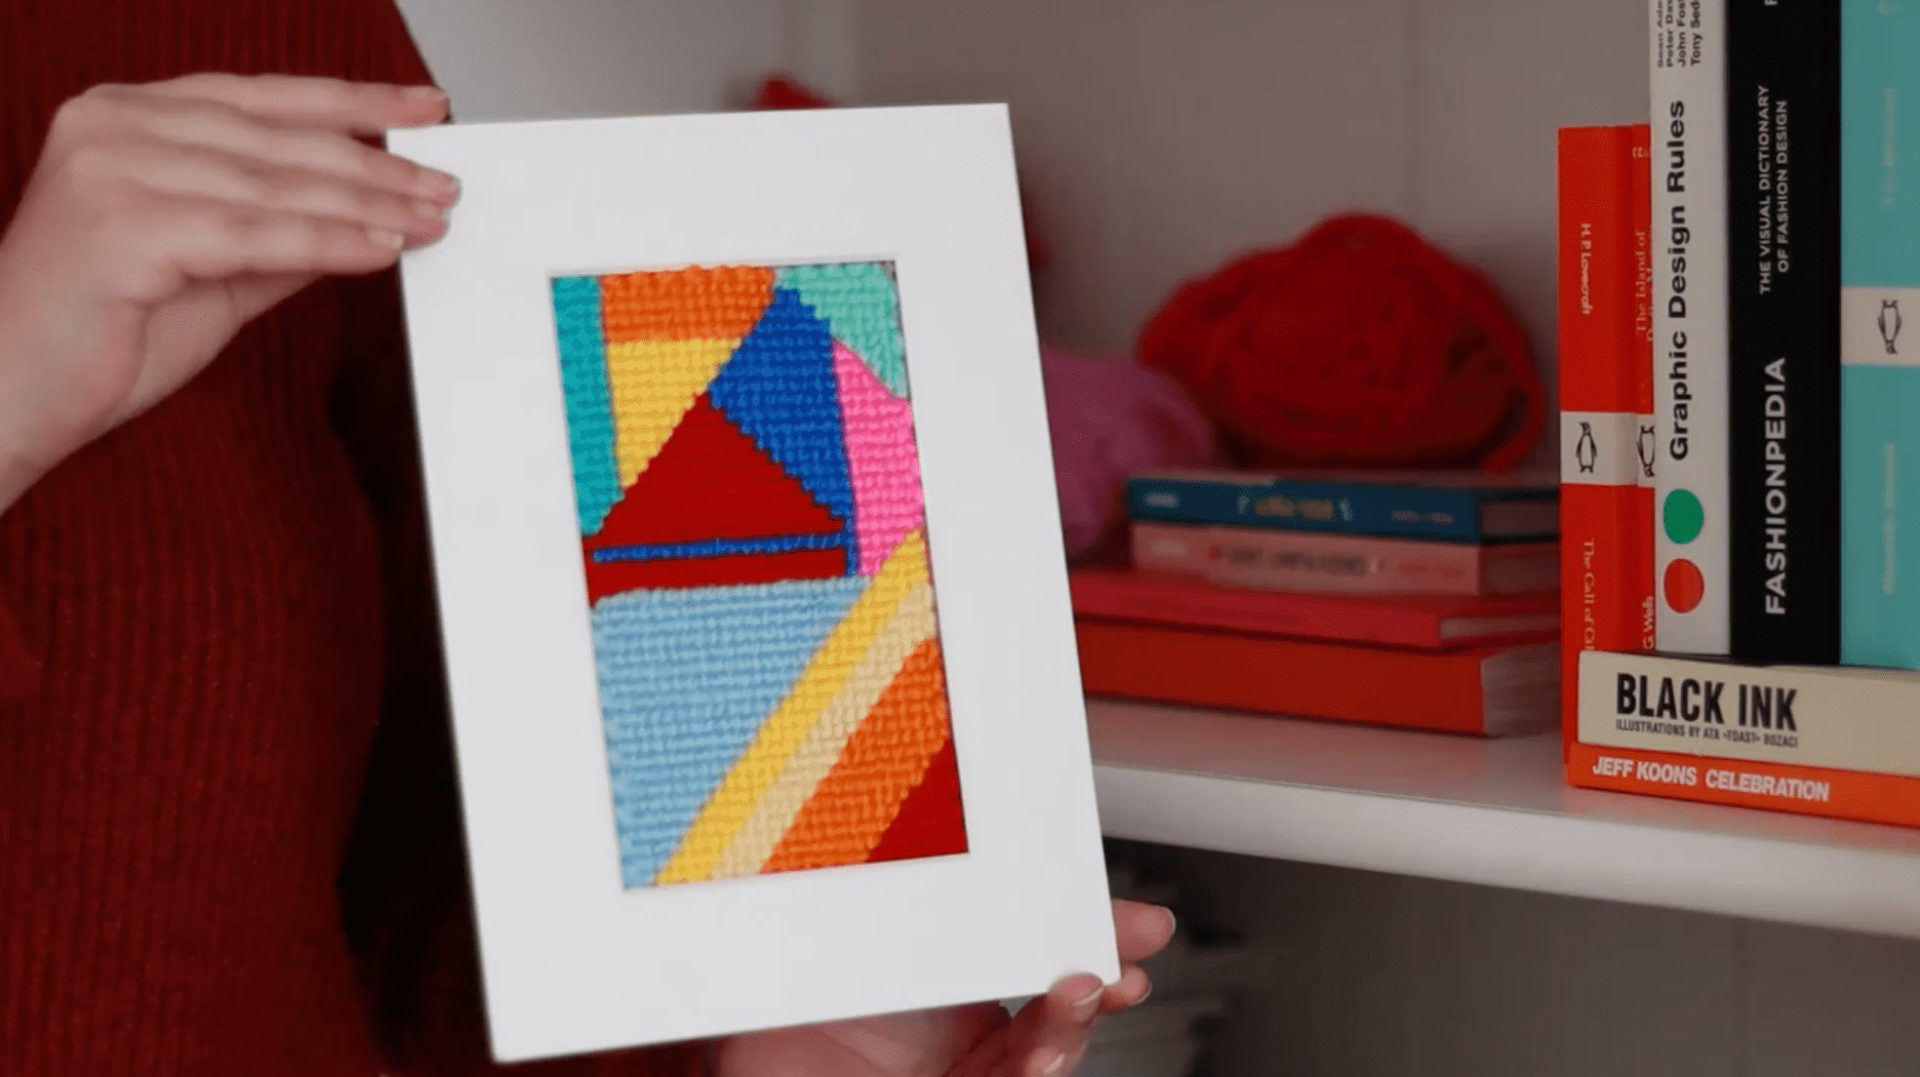 Someone in a red sweater holds a framed needlepoint project. It’s an abstract work made of blues, oranges, pinks, and reds. In the background, a bookshelf with a few books and balls of yarn is visible.